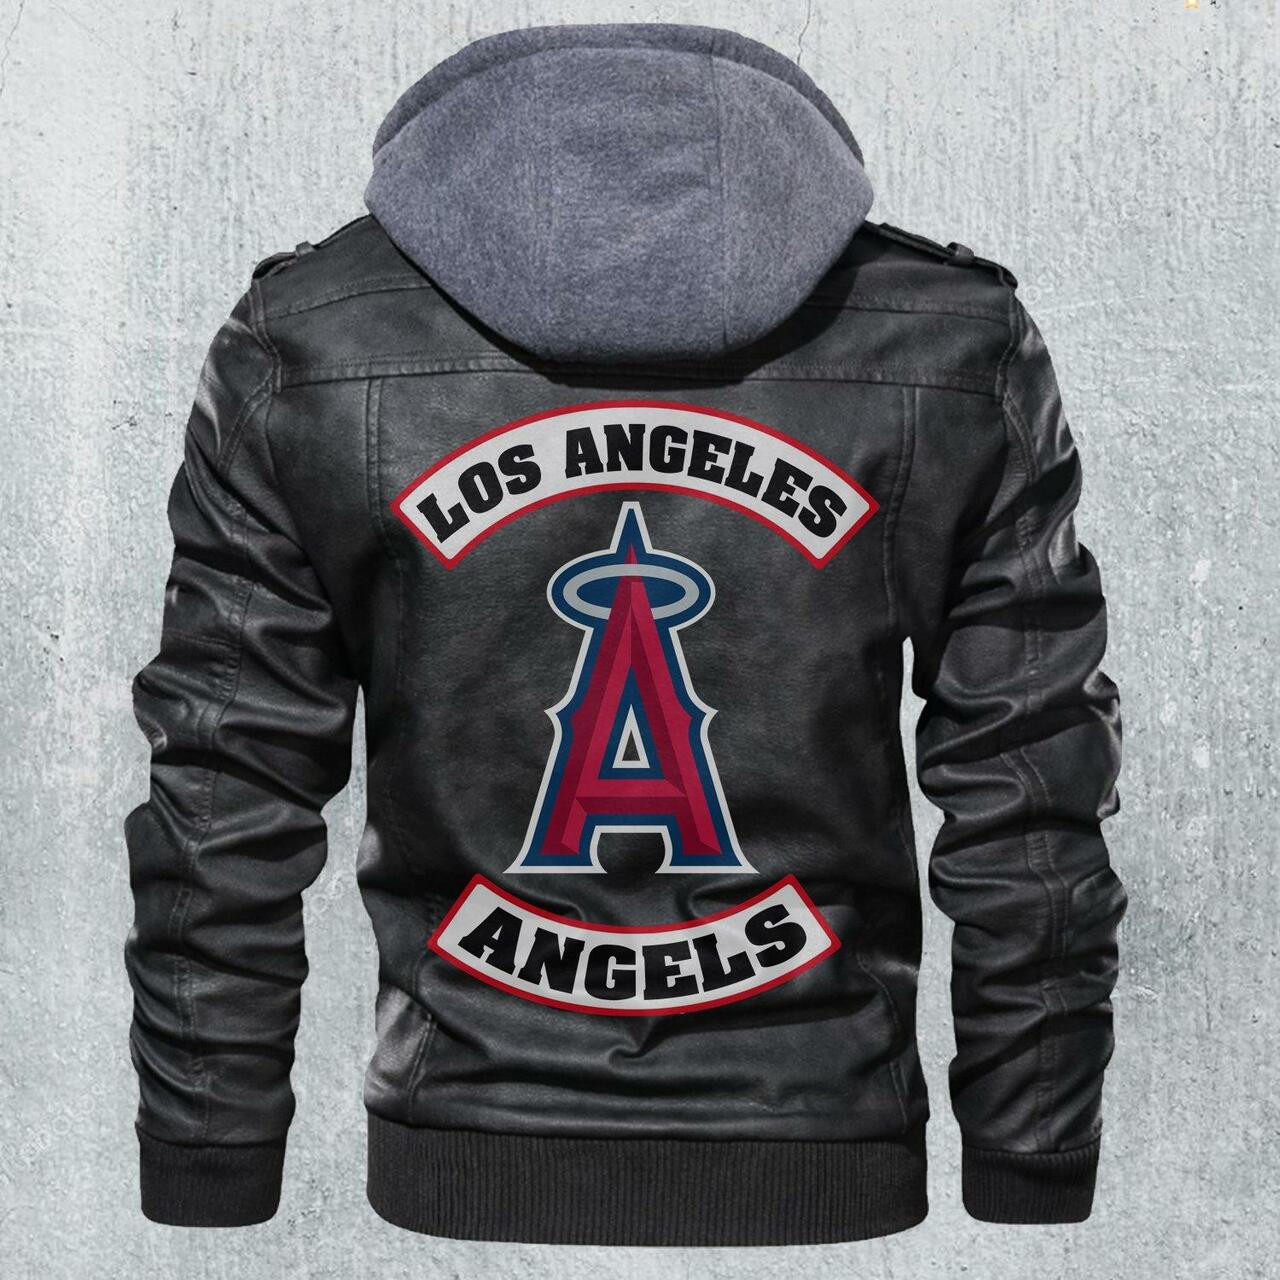 Our store has all of the latest leather jacket 51